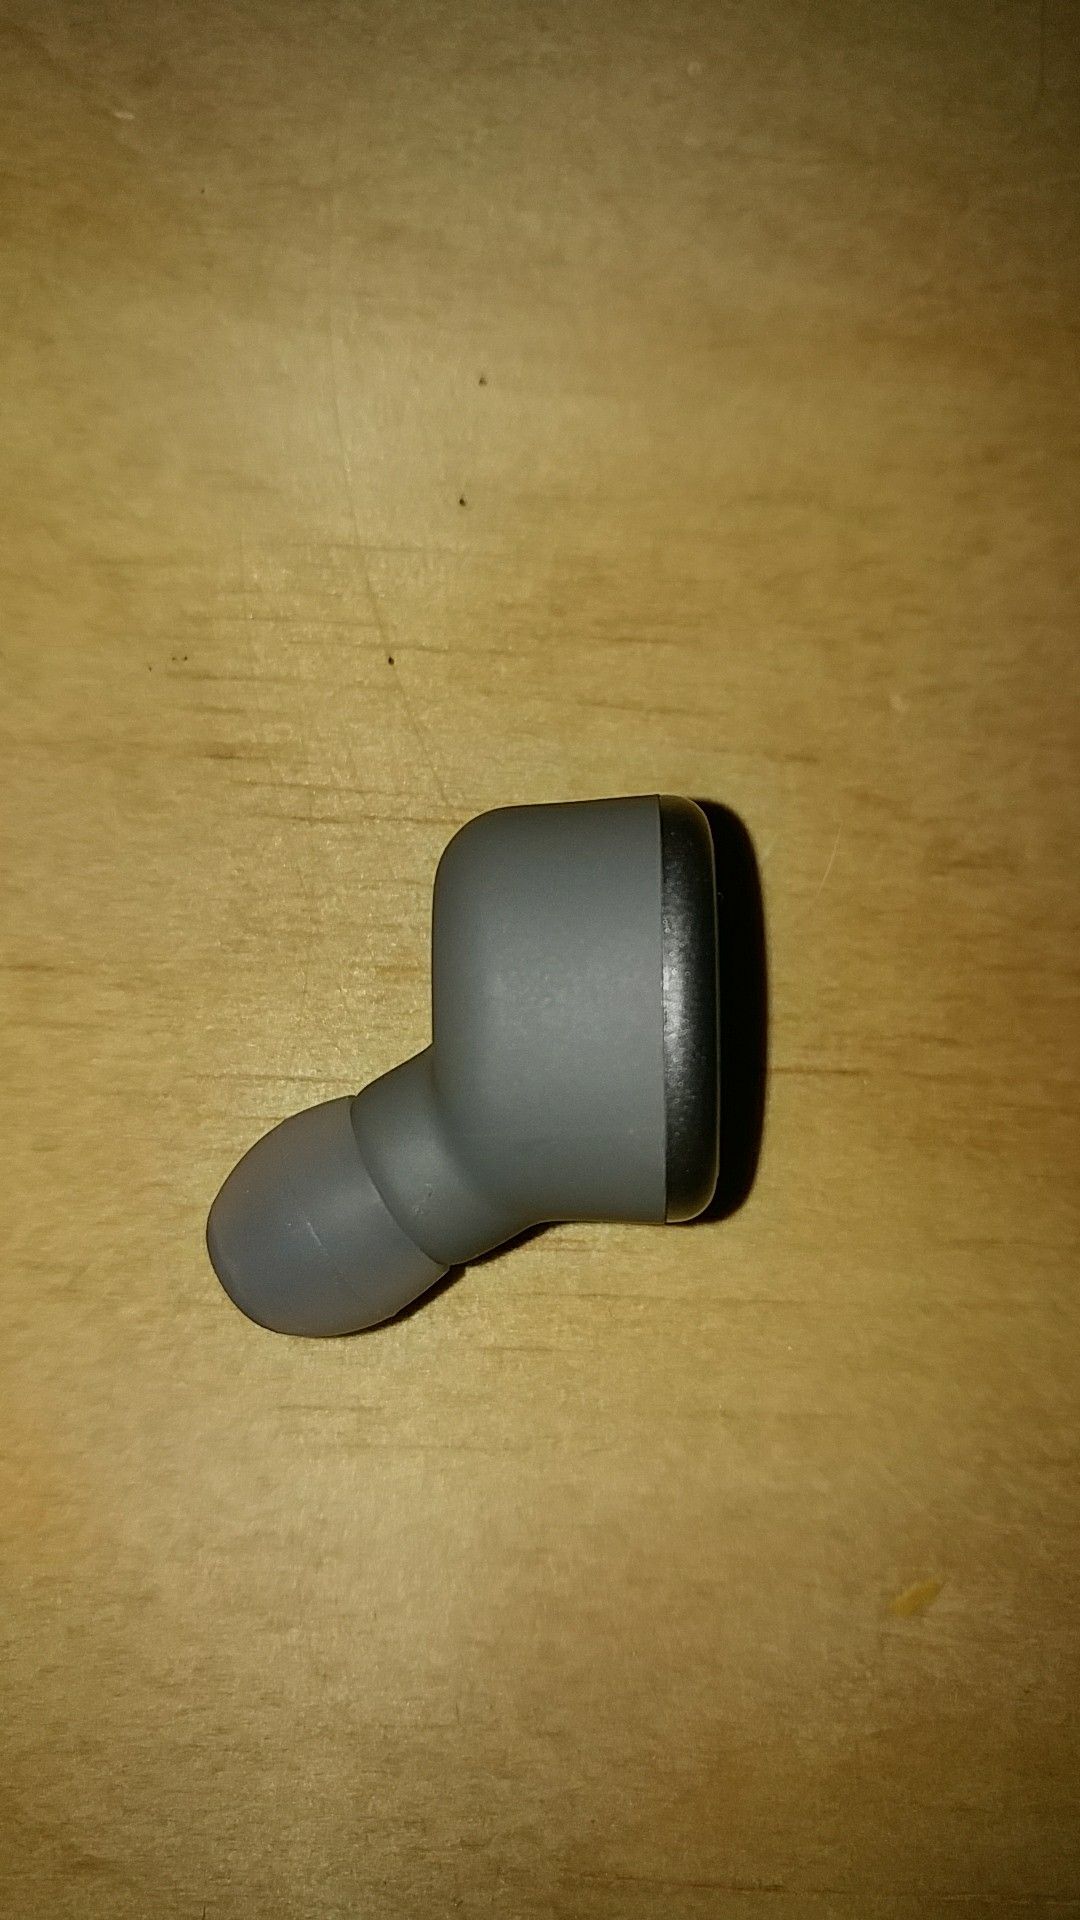 Tozo T10 Right Grey earbud.